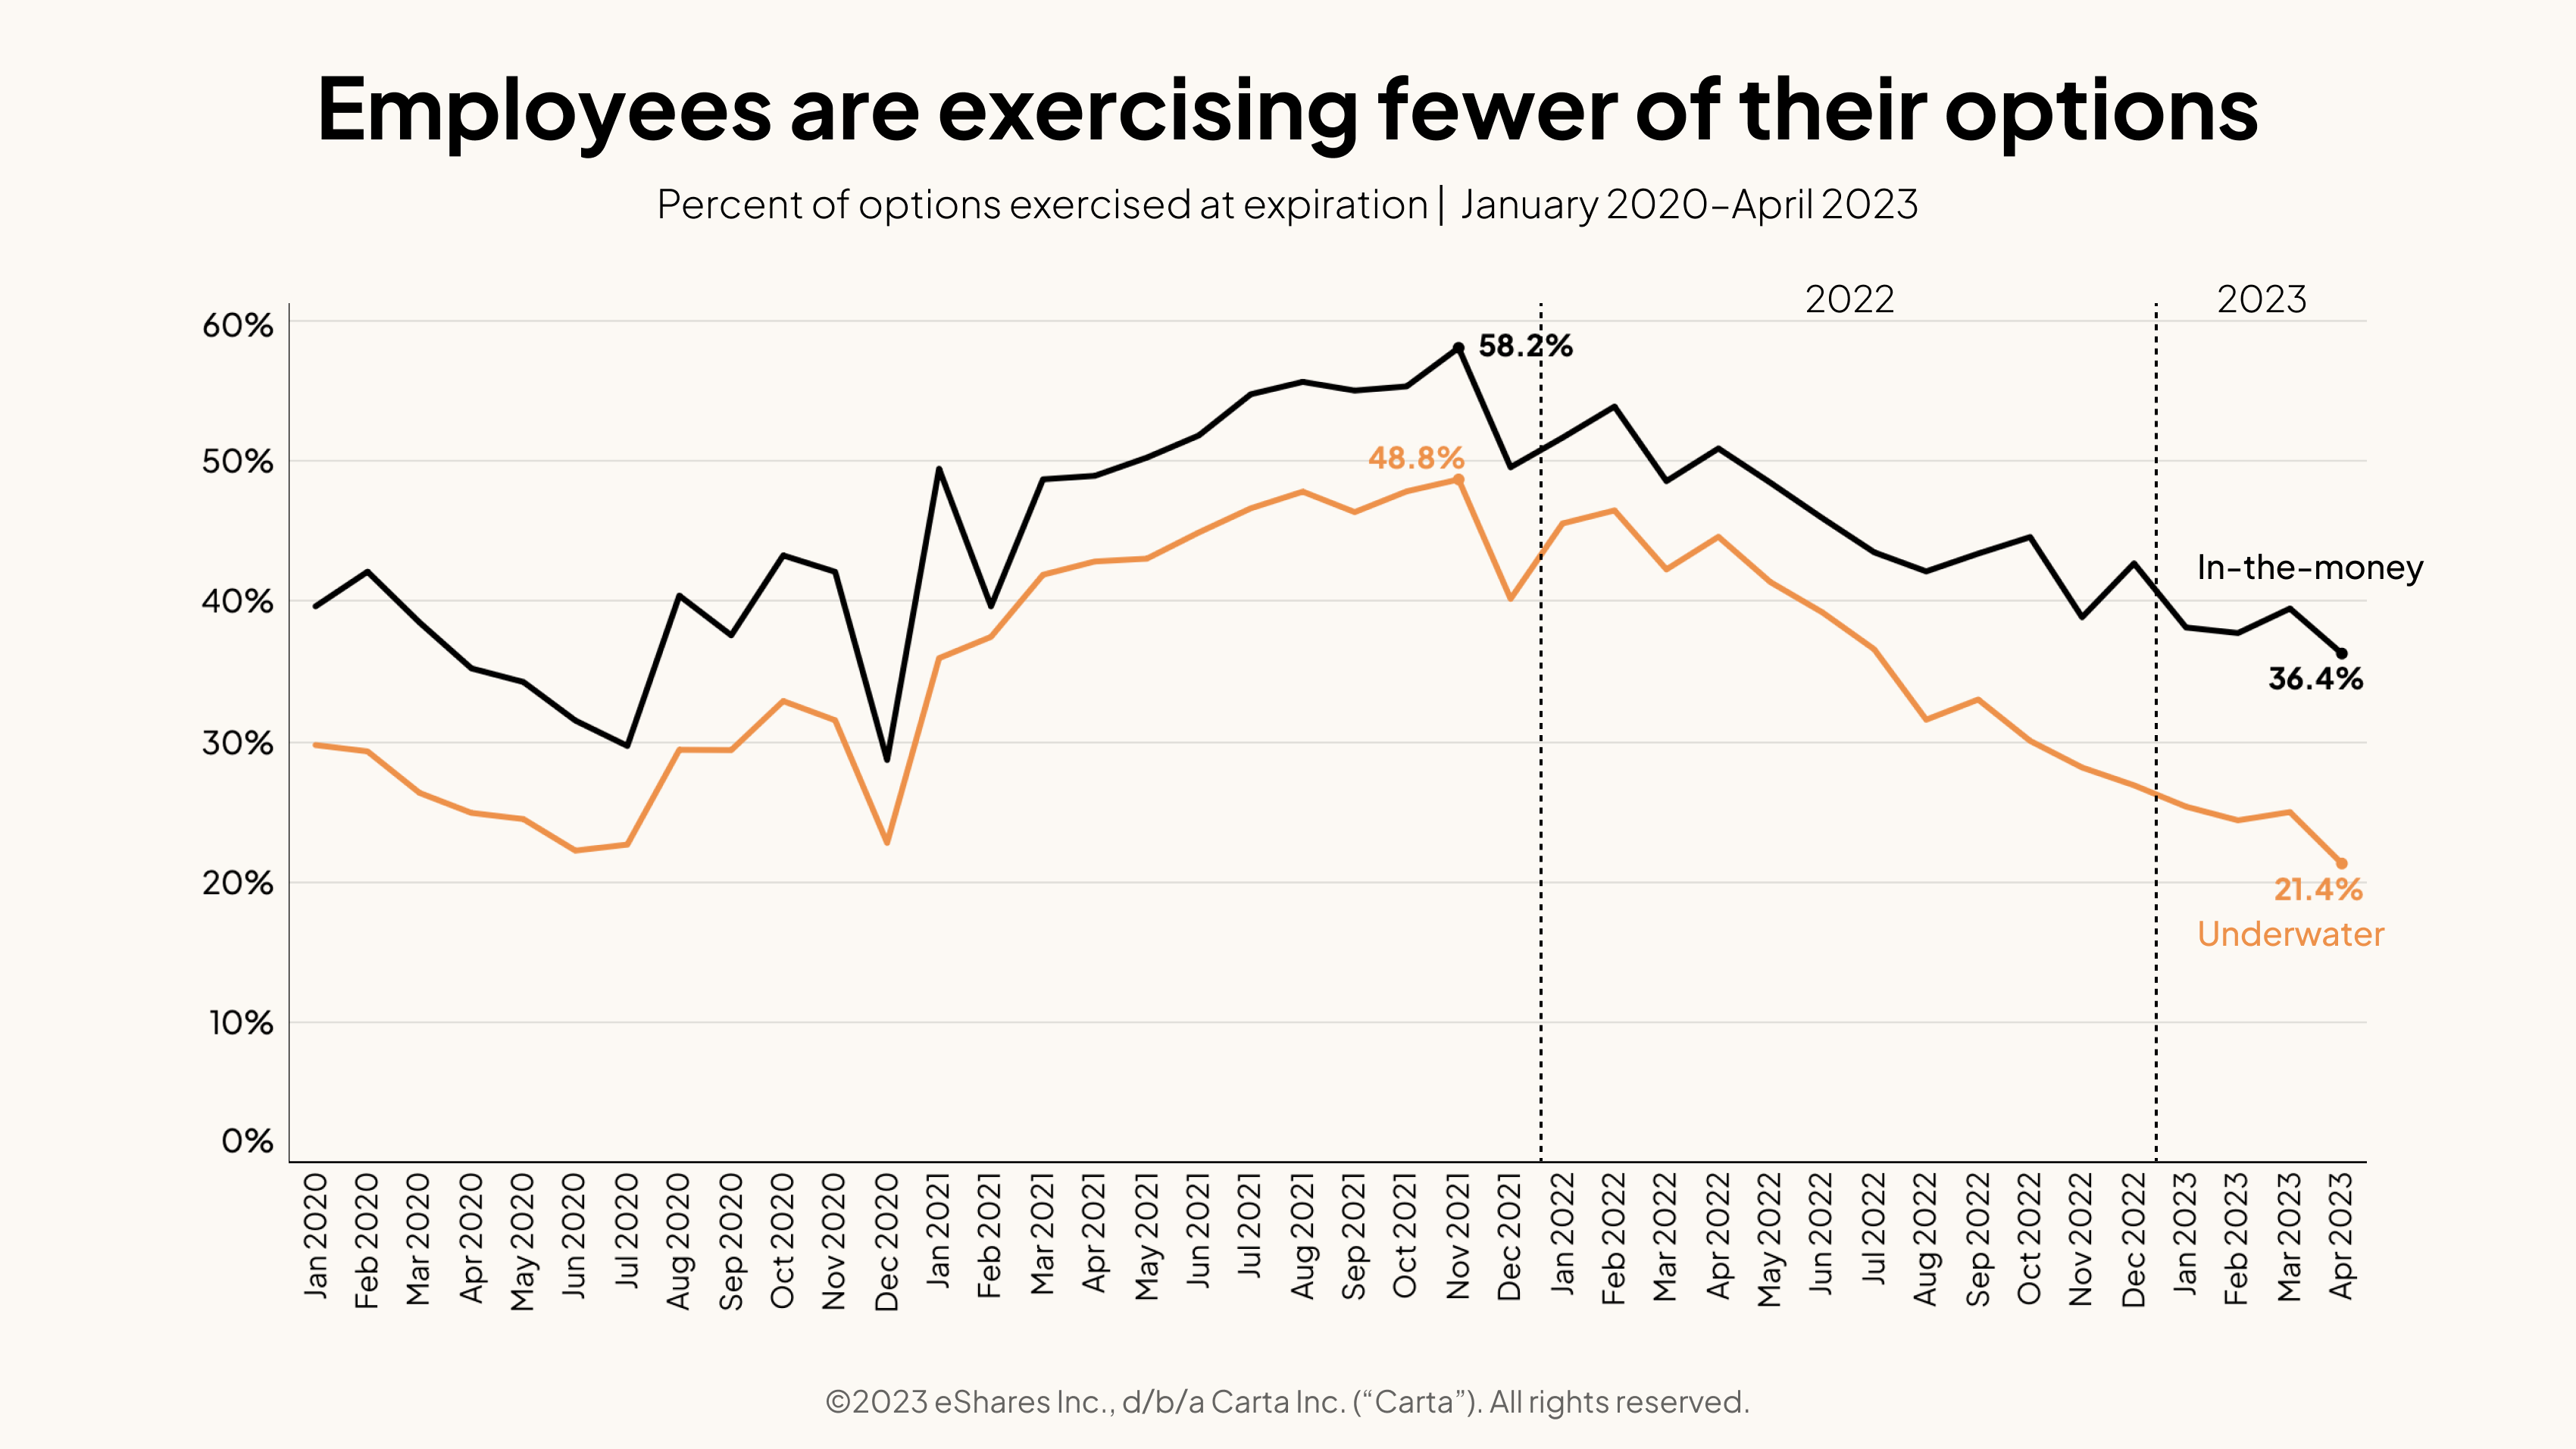 Employees are exercising fewer of their options